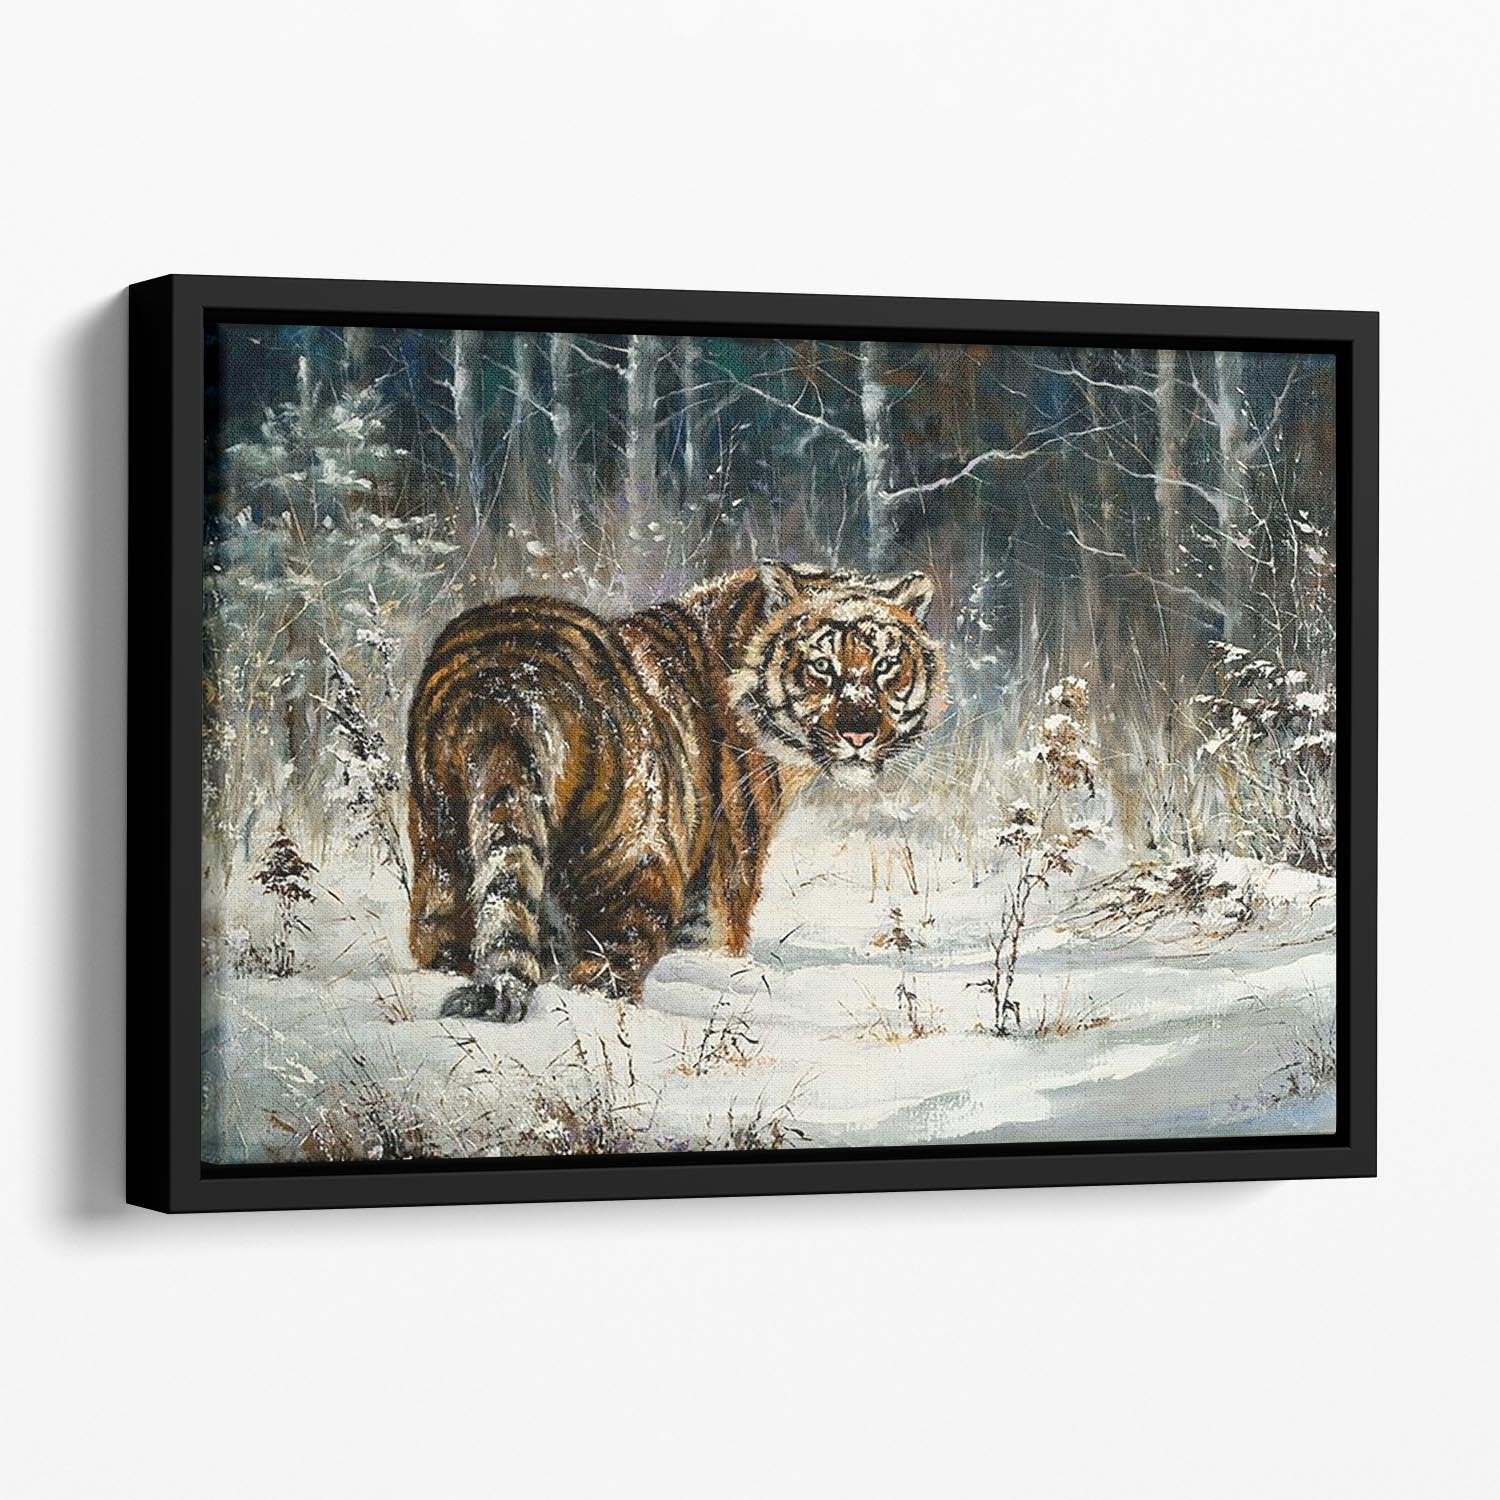 Landscape with a tiger in winter wood Floating Framed Canvas - Canvas Art Rocks - 1